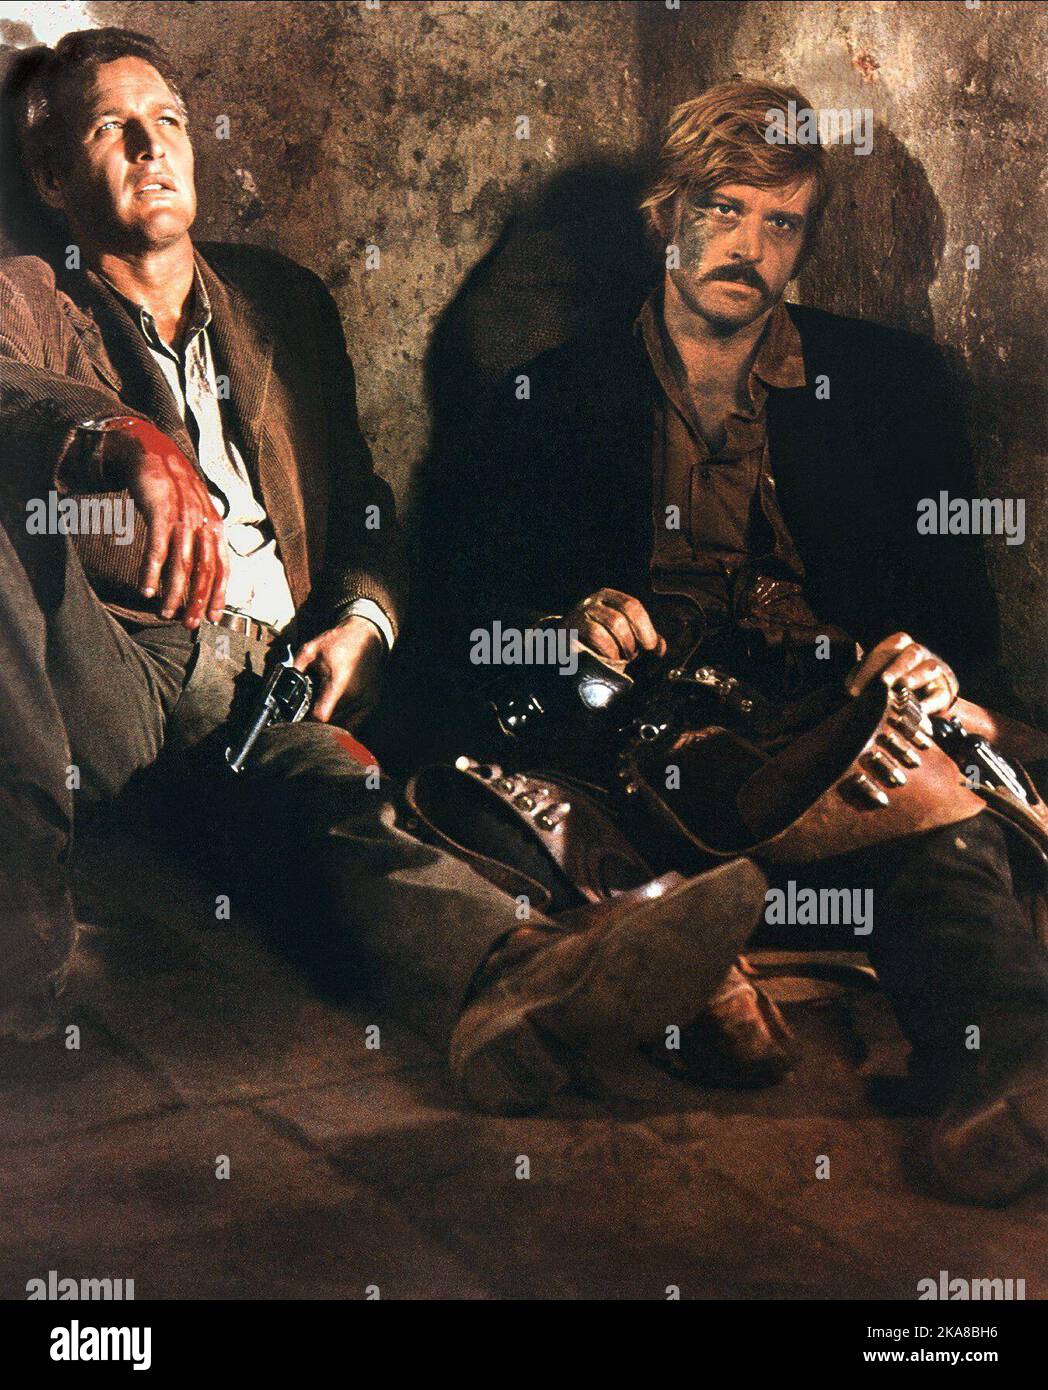 Butch Cassidy And The Sundance Kid Paul Newman & Robert Redford Stock Photo